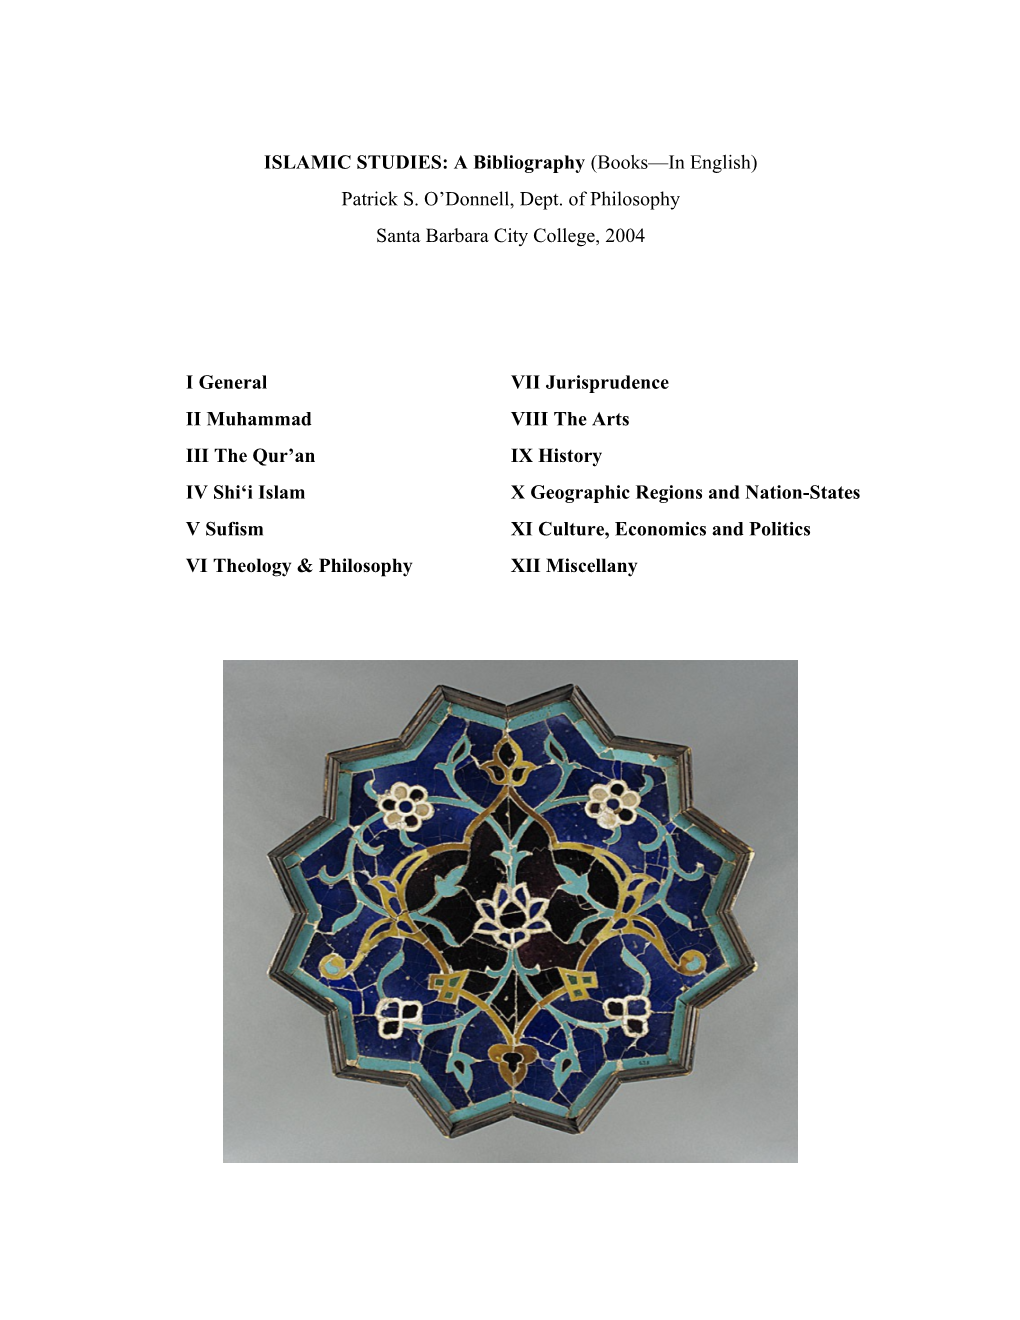 Islam: a Select Bibliography s1